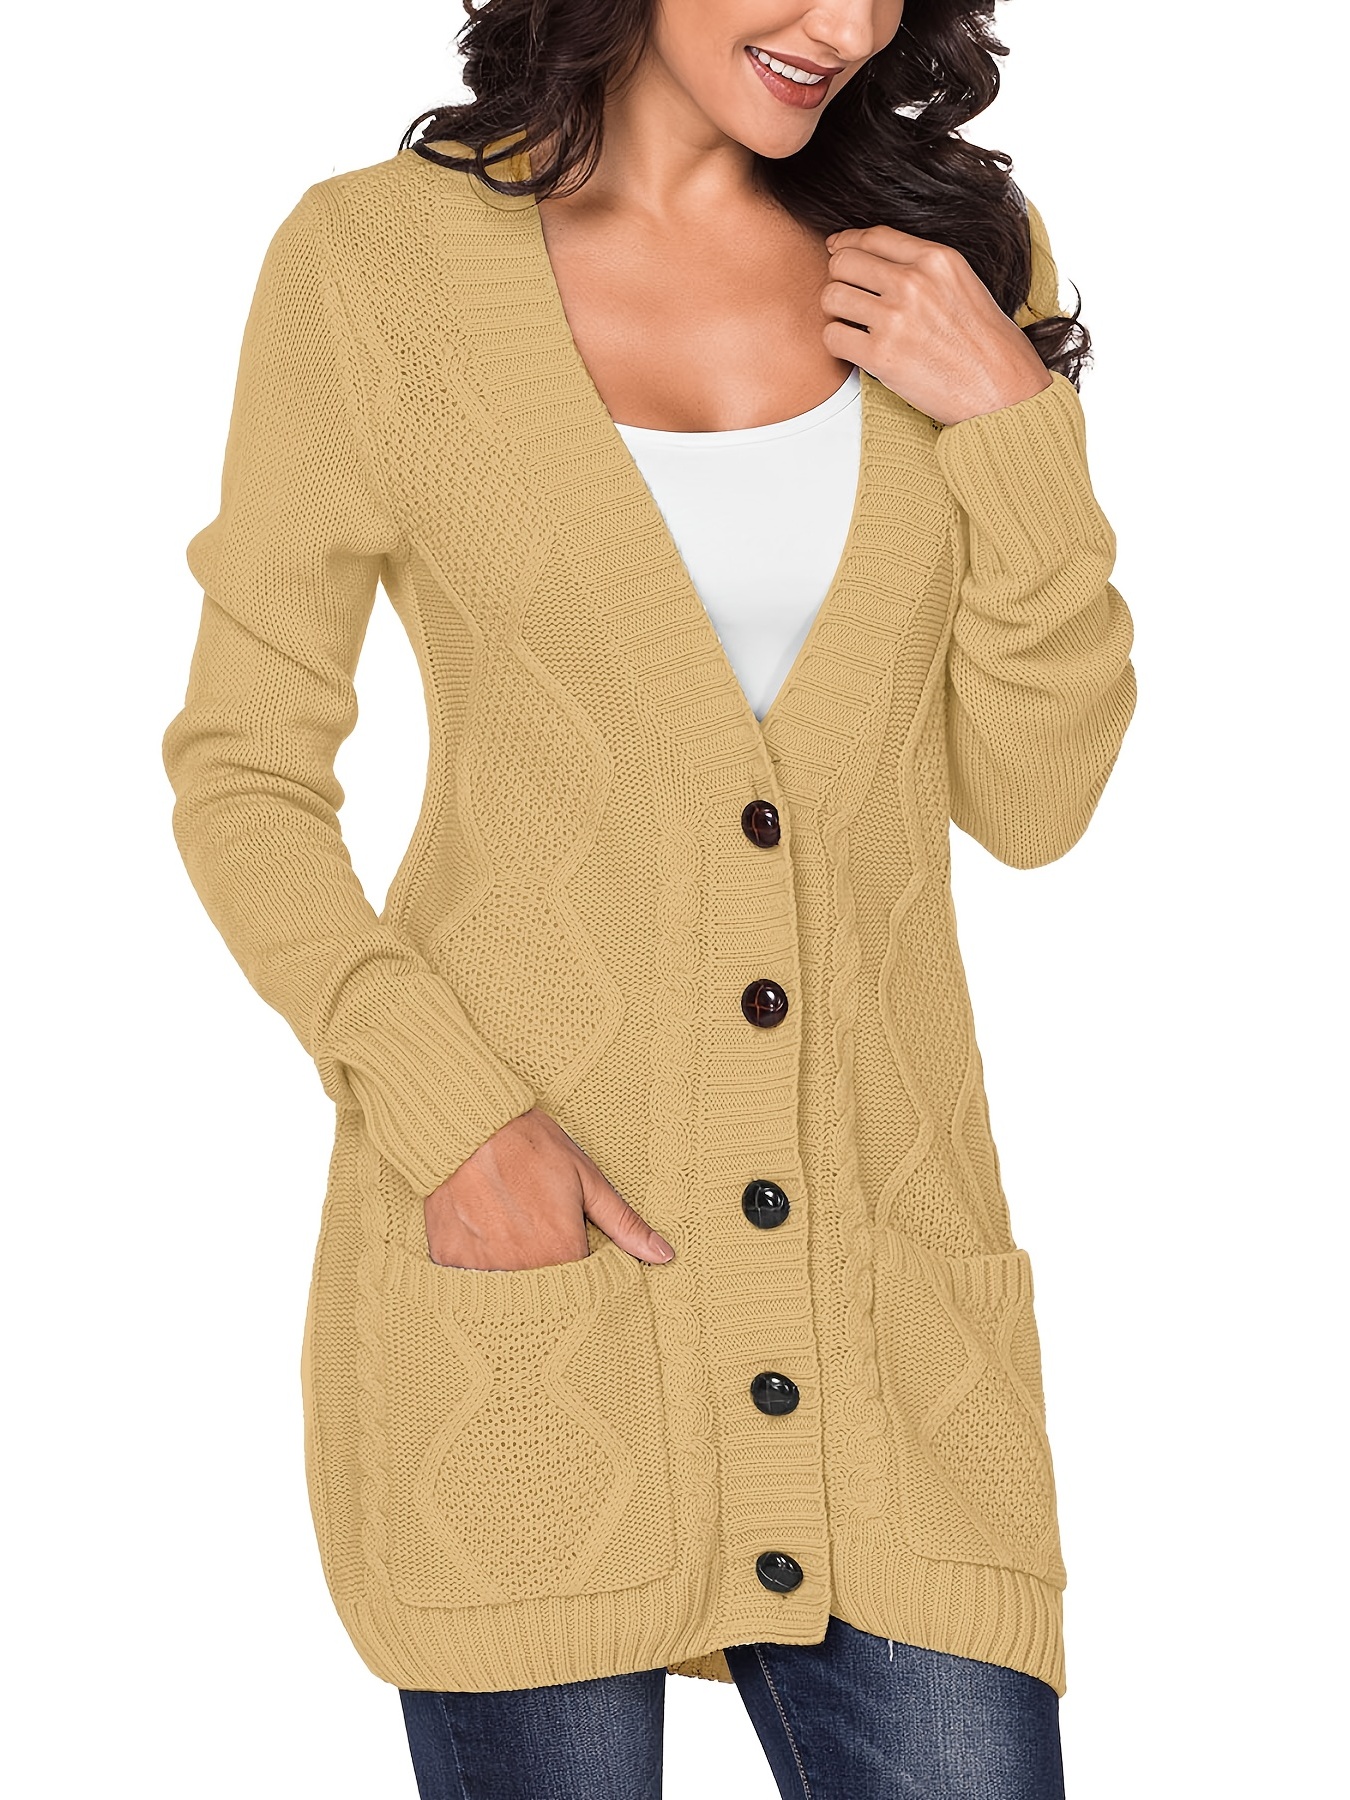 Cable Cardigans For Women, Womens Knitwear